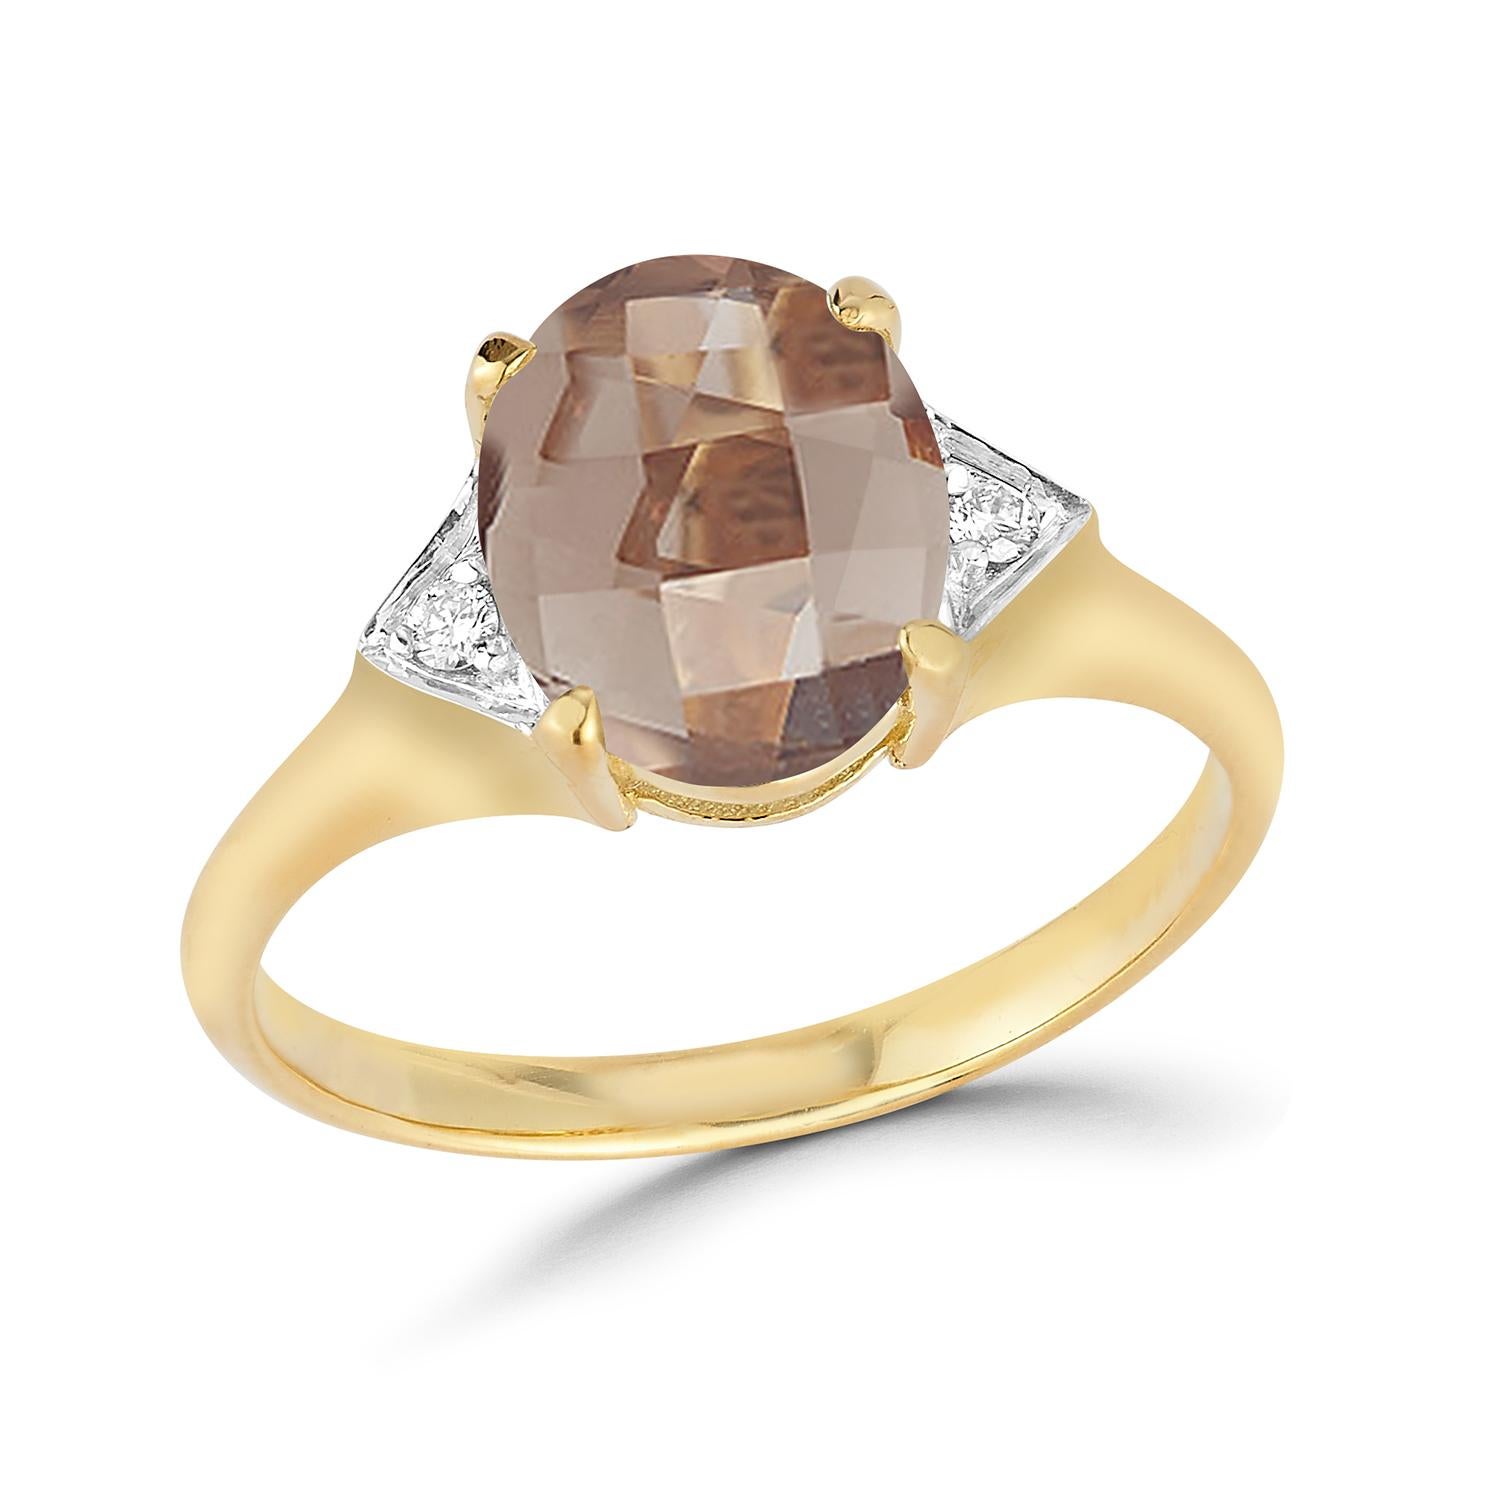 For Sale:  Hand-Crafted 14K Gold 0.05 ct. tw. Diamond & 4.75CT Smokey Topaz Cocktail Ring 4